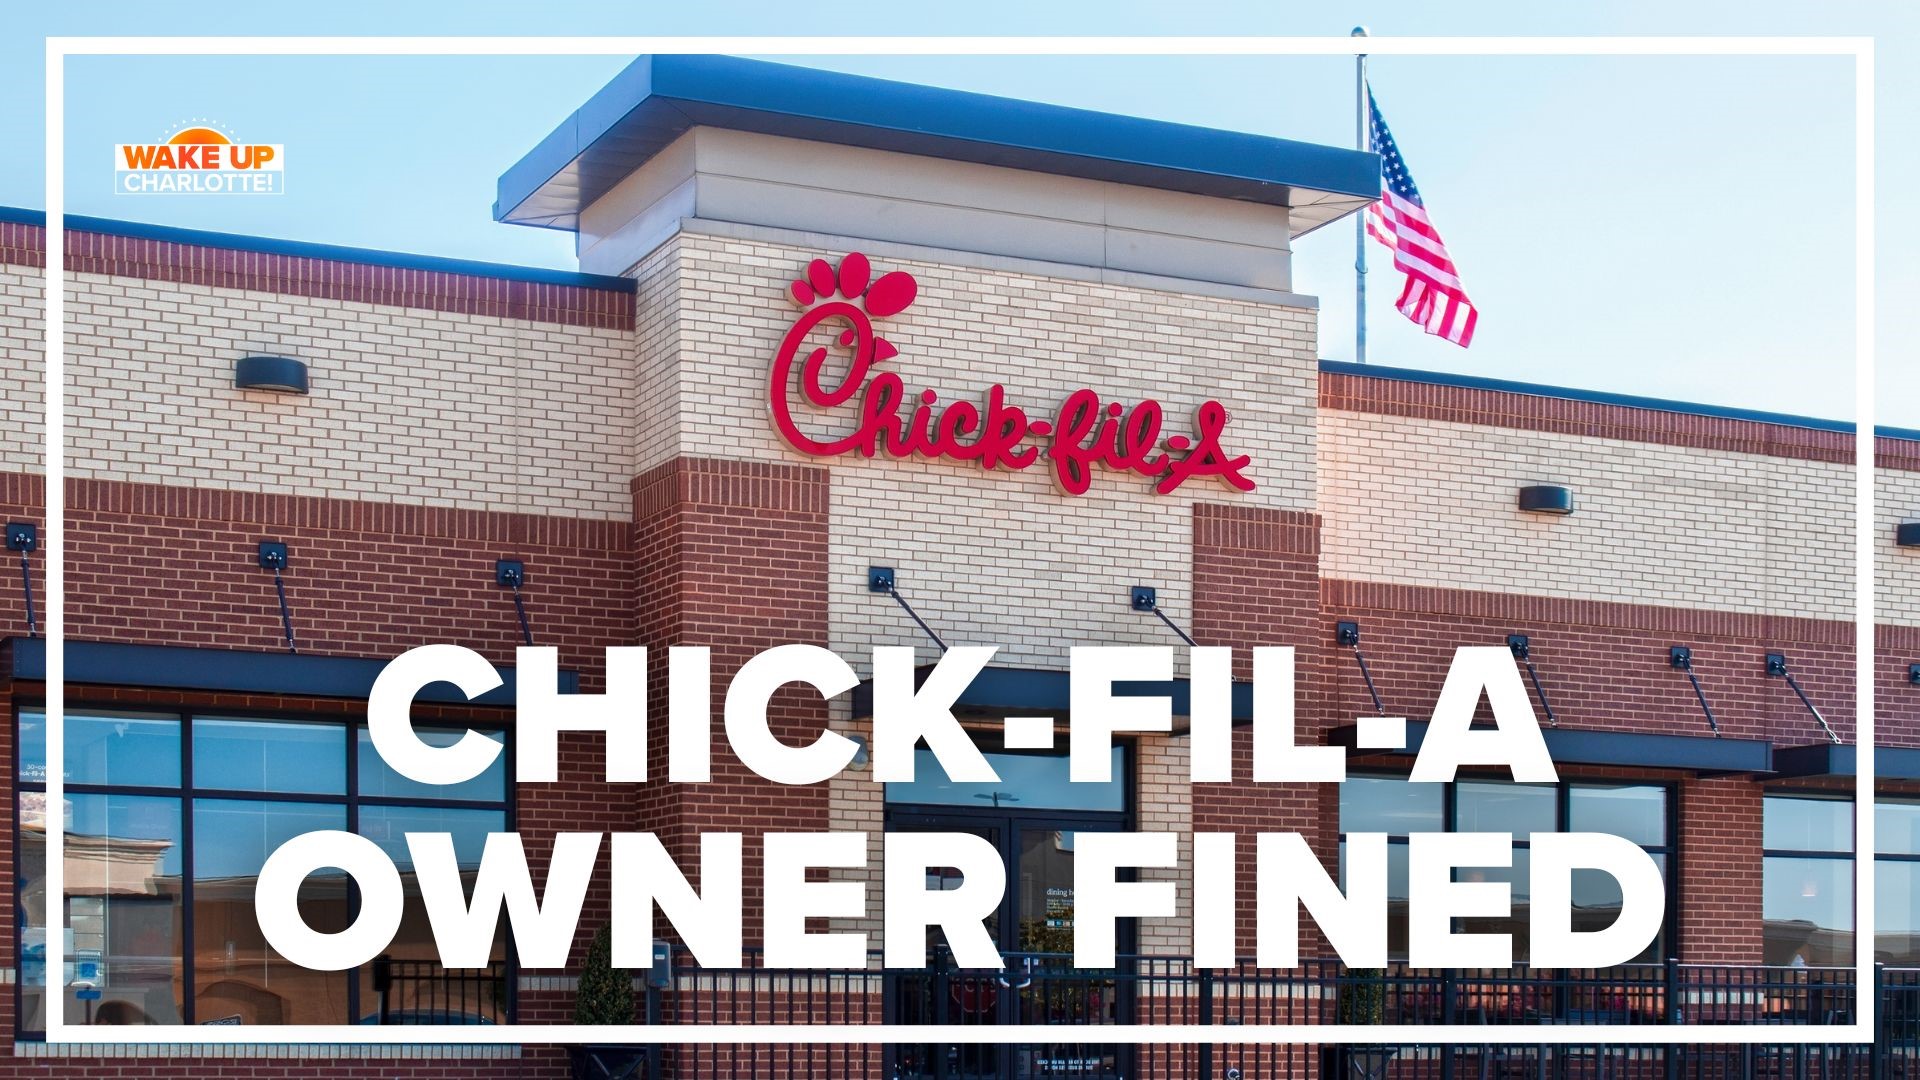 NC Chick-fil-A fined for paying workers with food, not cash 